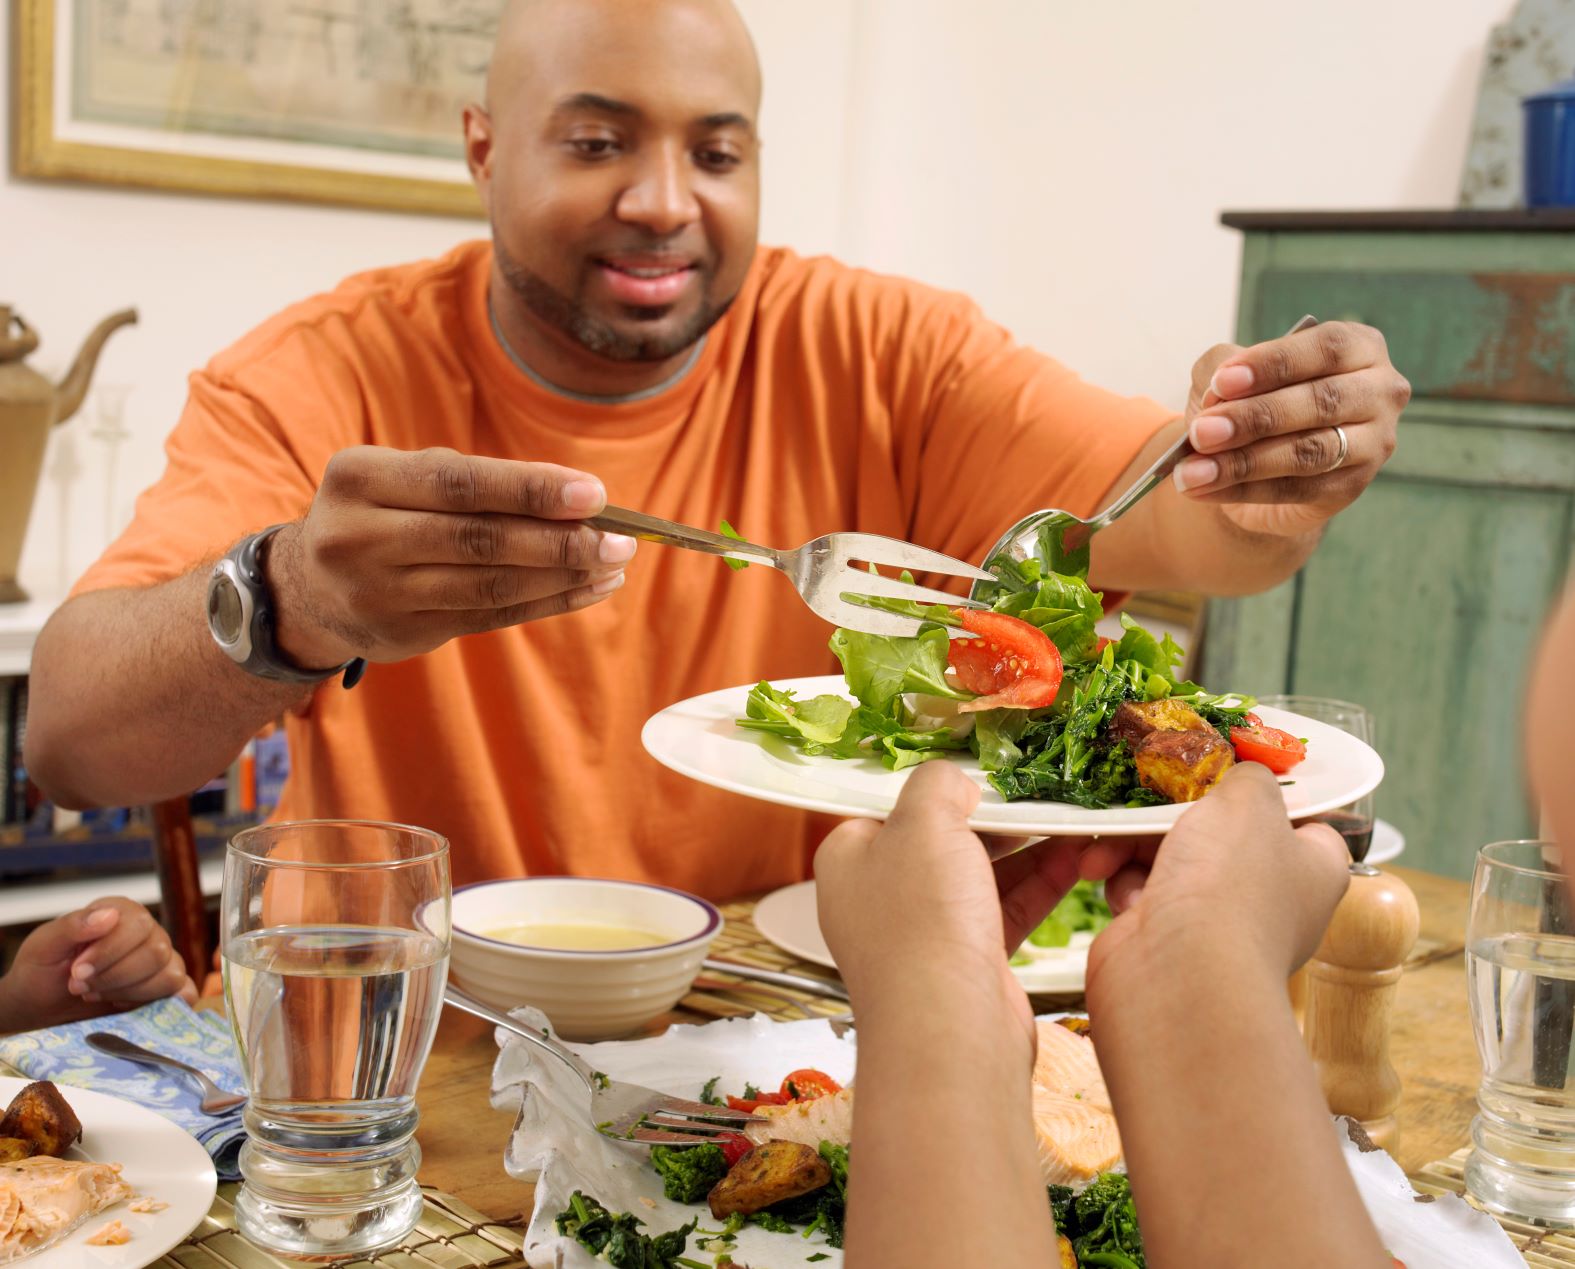 A man serving another person salad onto their plate